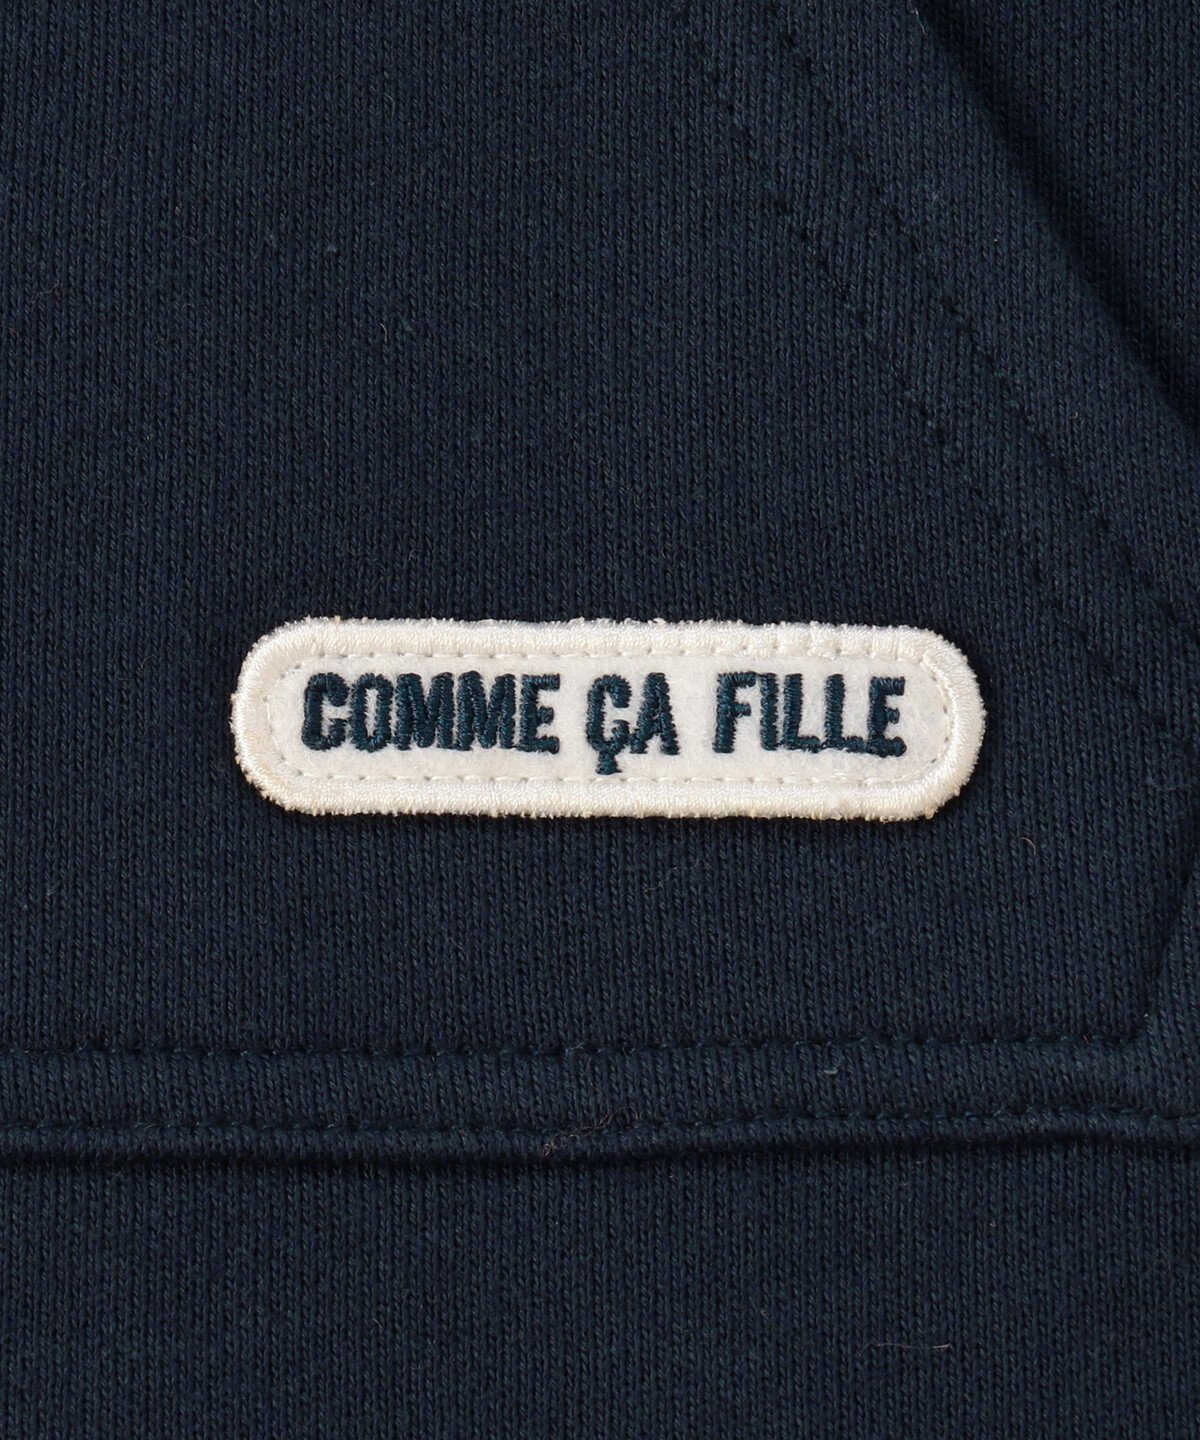 COMME CA FILLE｜コットン裏毛ボア刺繍トレーナー ワンピース